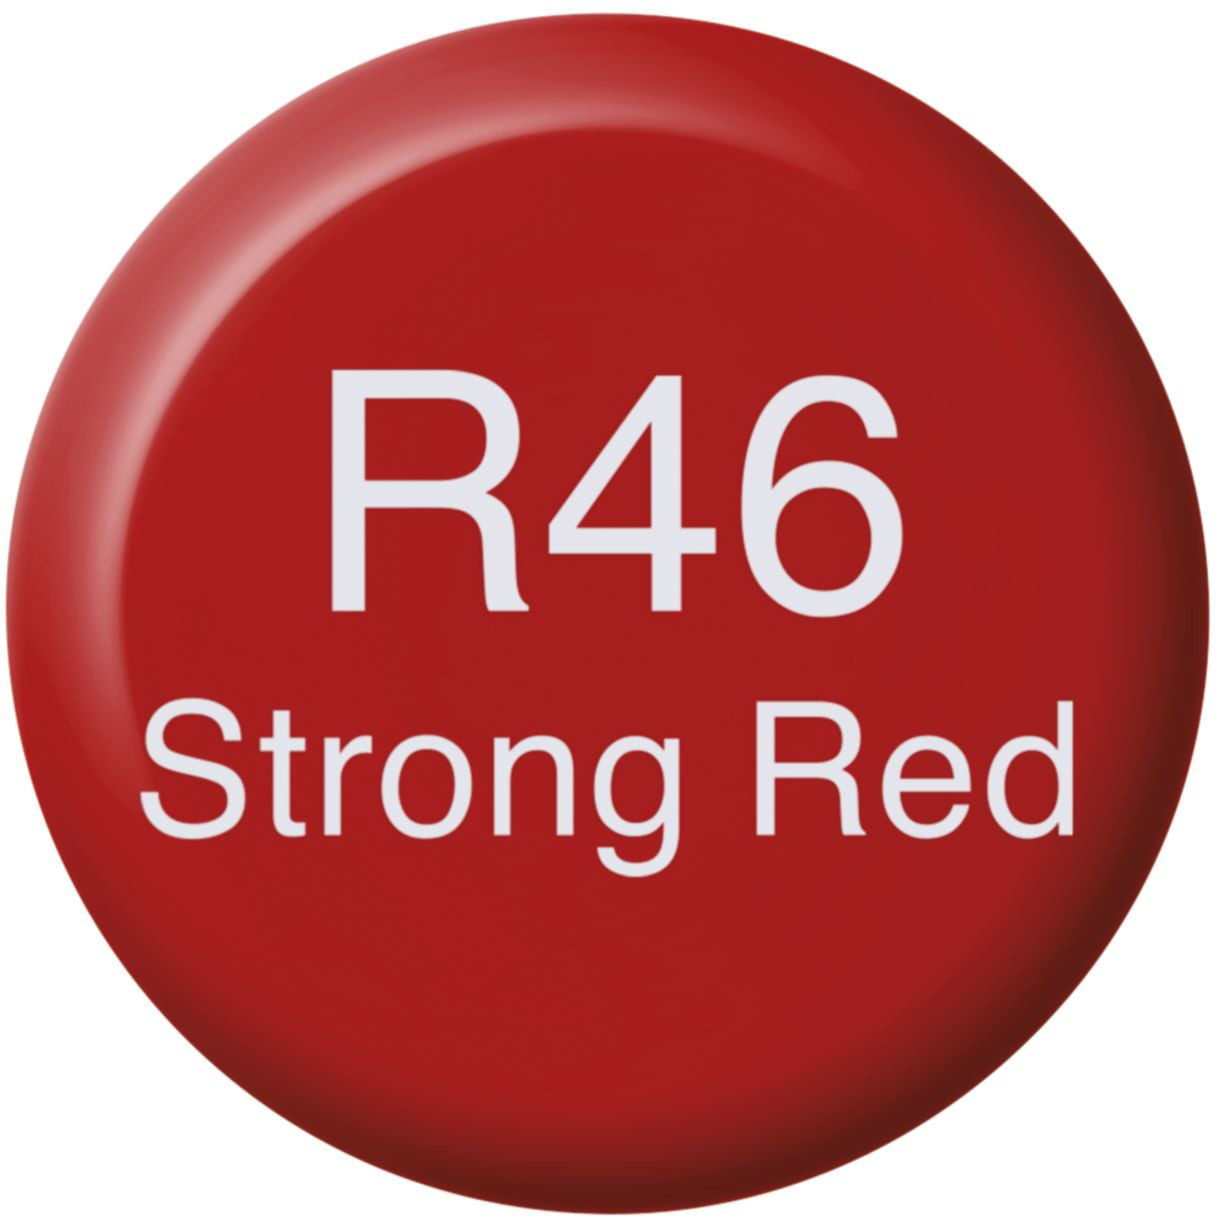 COPIC Ink Refill 21076256 R46 - Strong Red